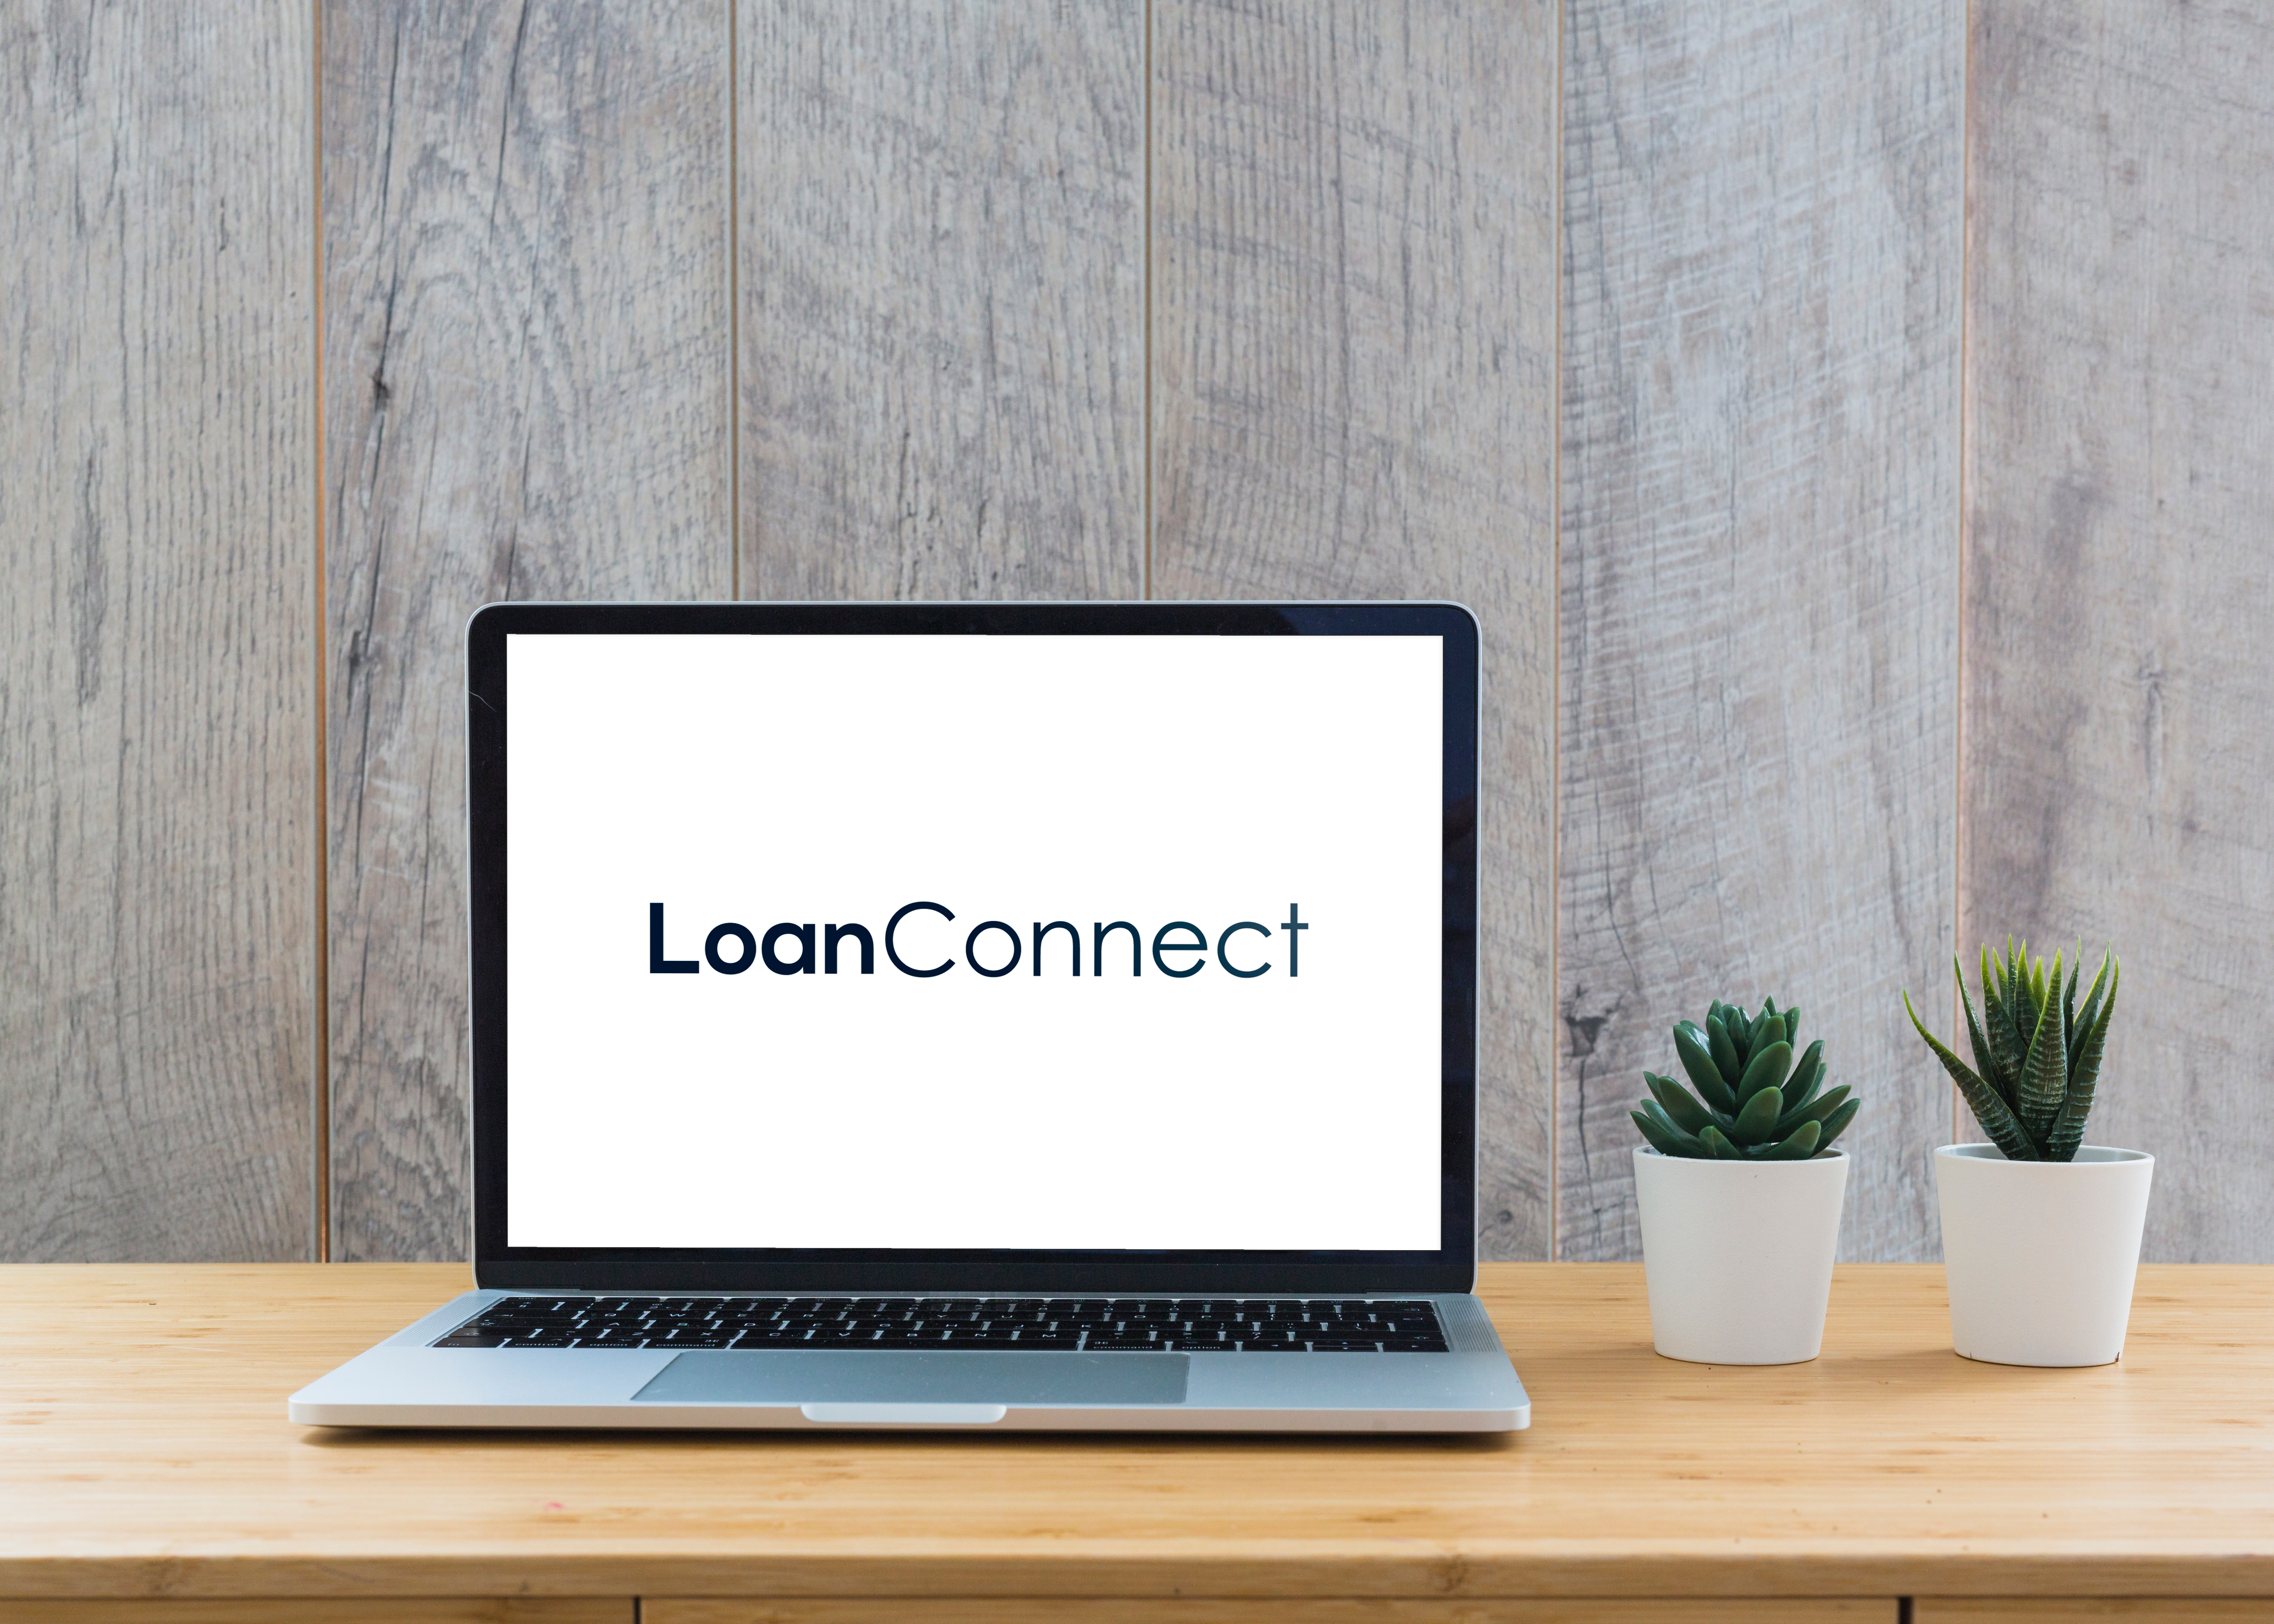 Find out how to start using LoanConnect services. Source: The Mister Finance.